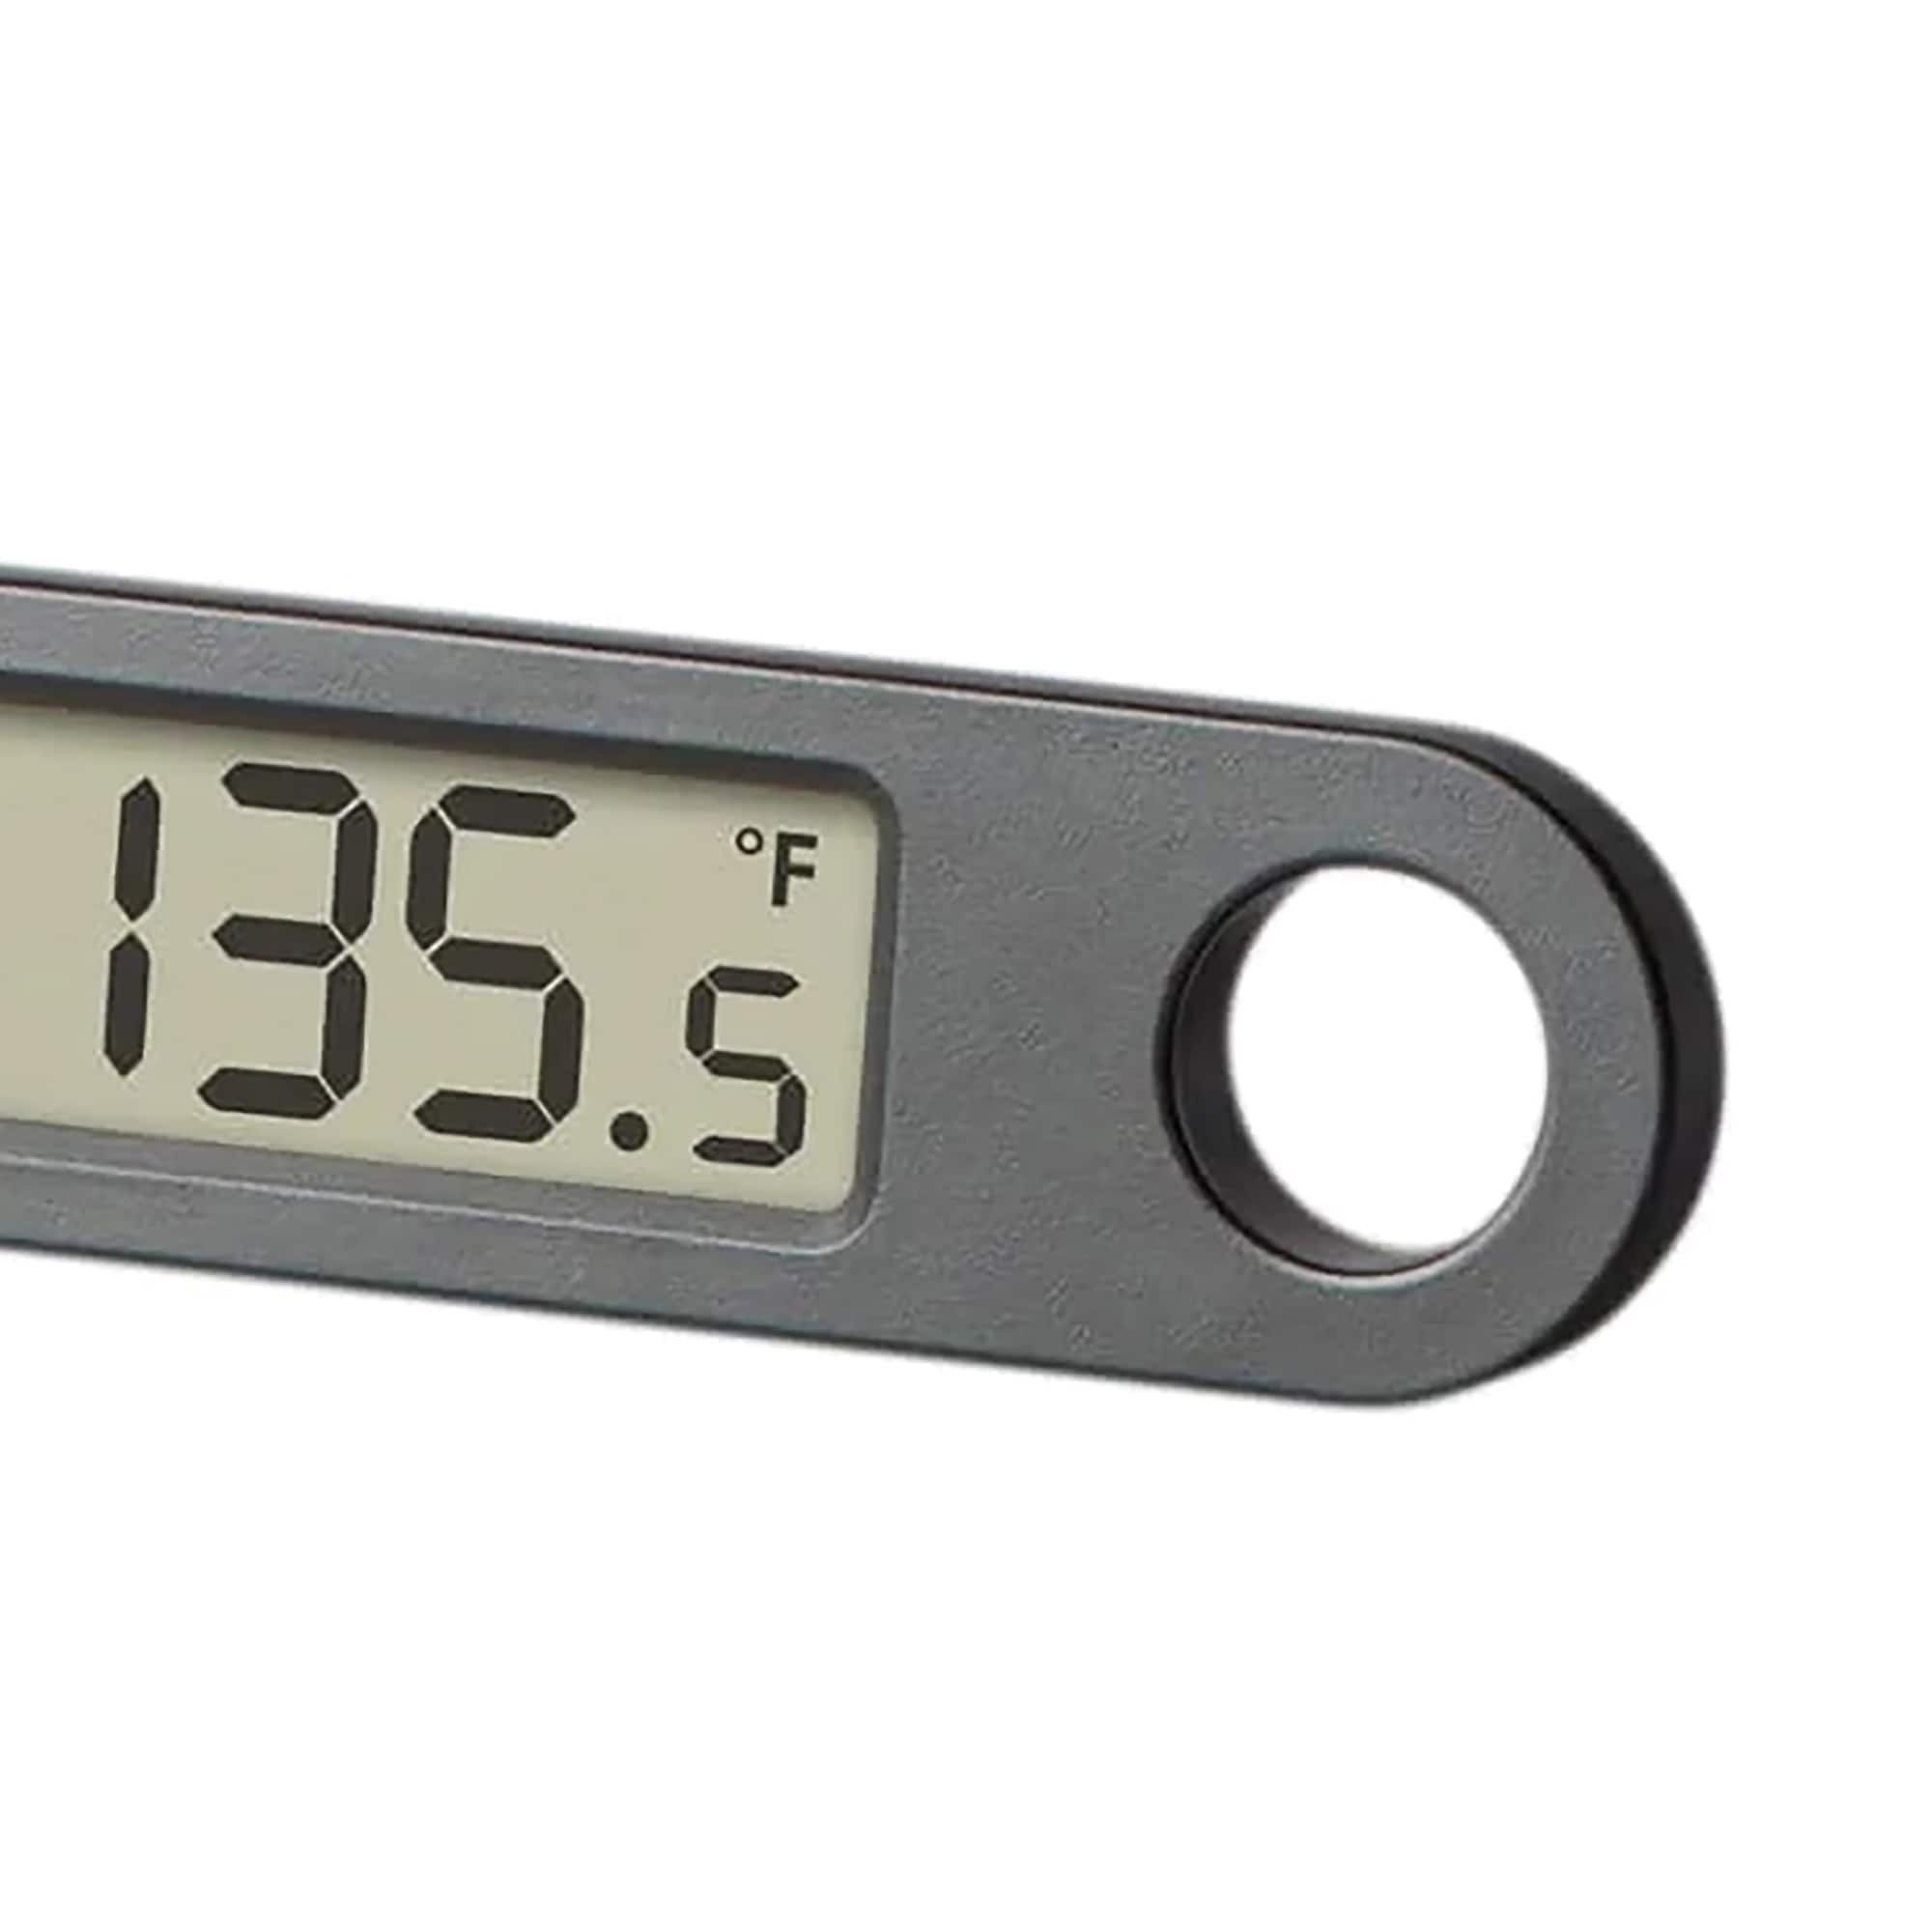 Honest Product Review: Taylor Digital Cooking Probe Thermometer